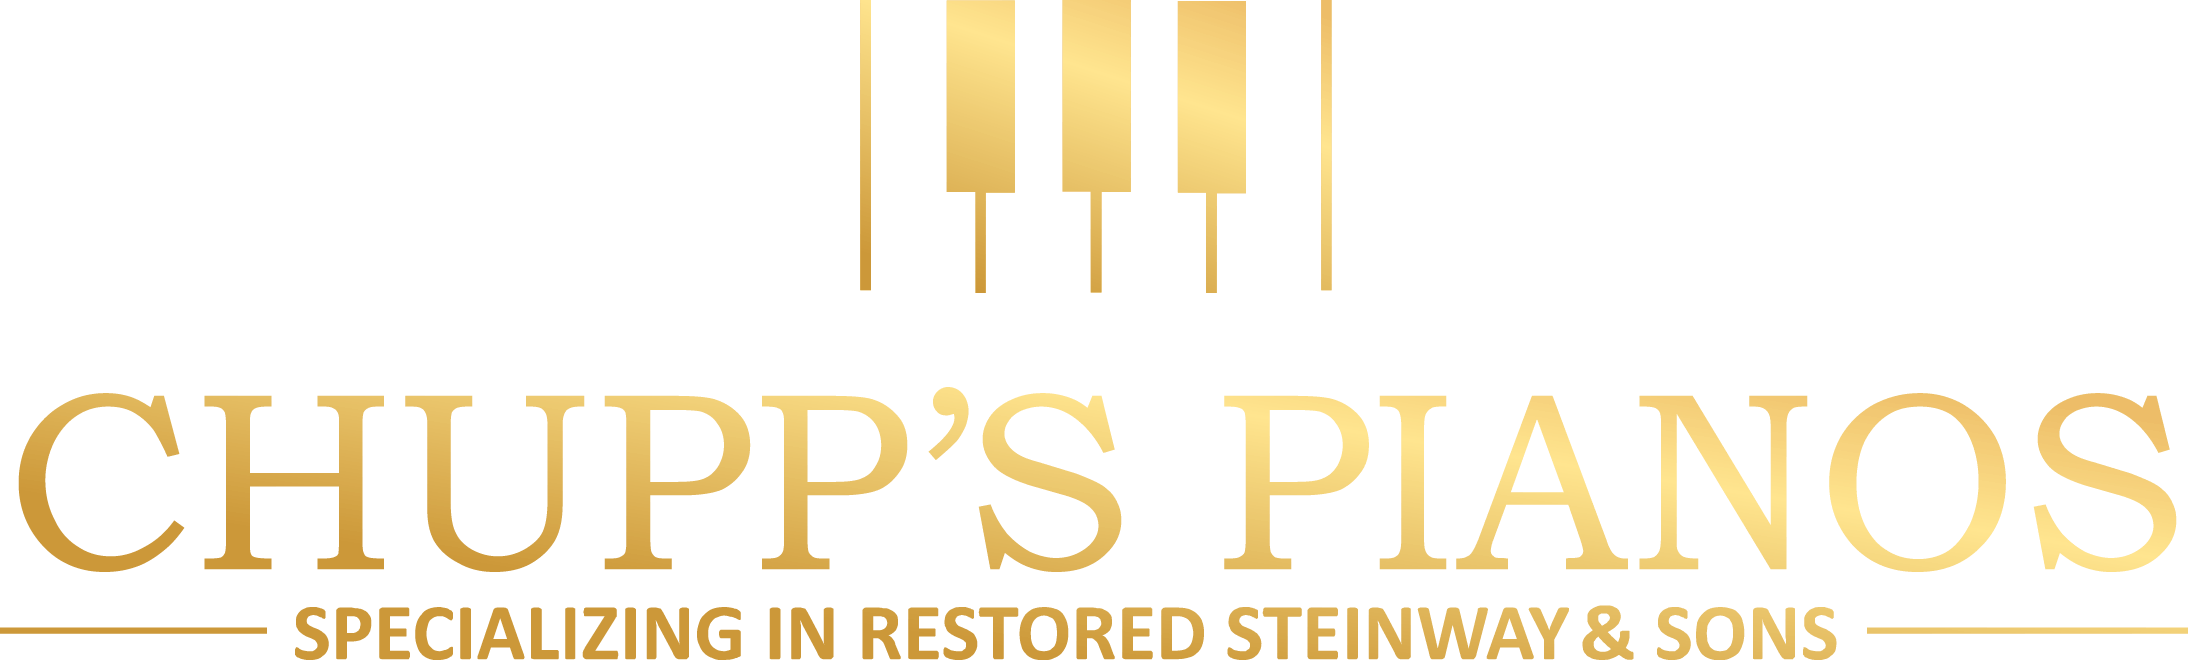 Gold Piano Logo - Restoring a “Golden Age” Steinway Grand Piano - Janet's Piano